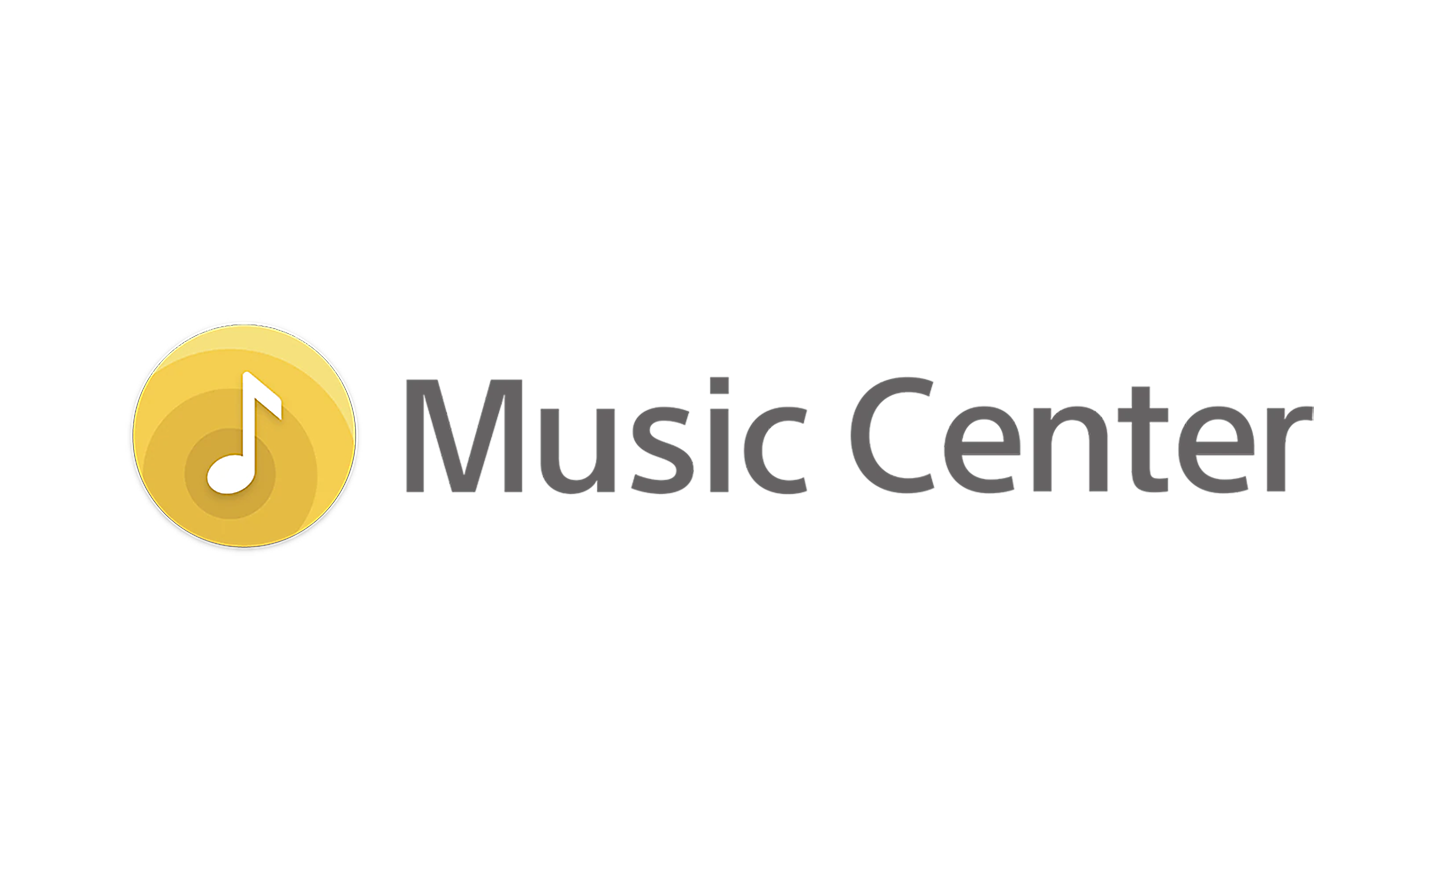 Image of the Sony l Music Center app icon